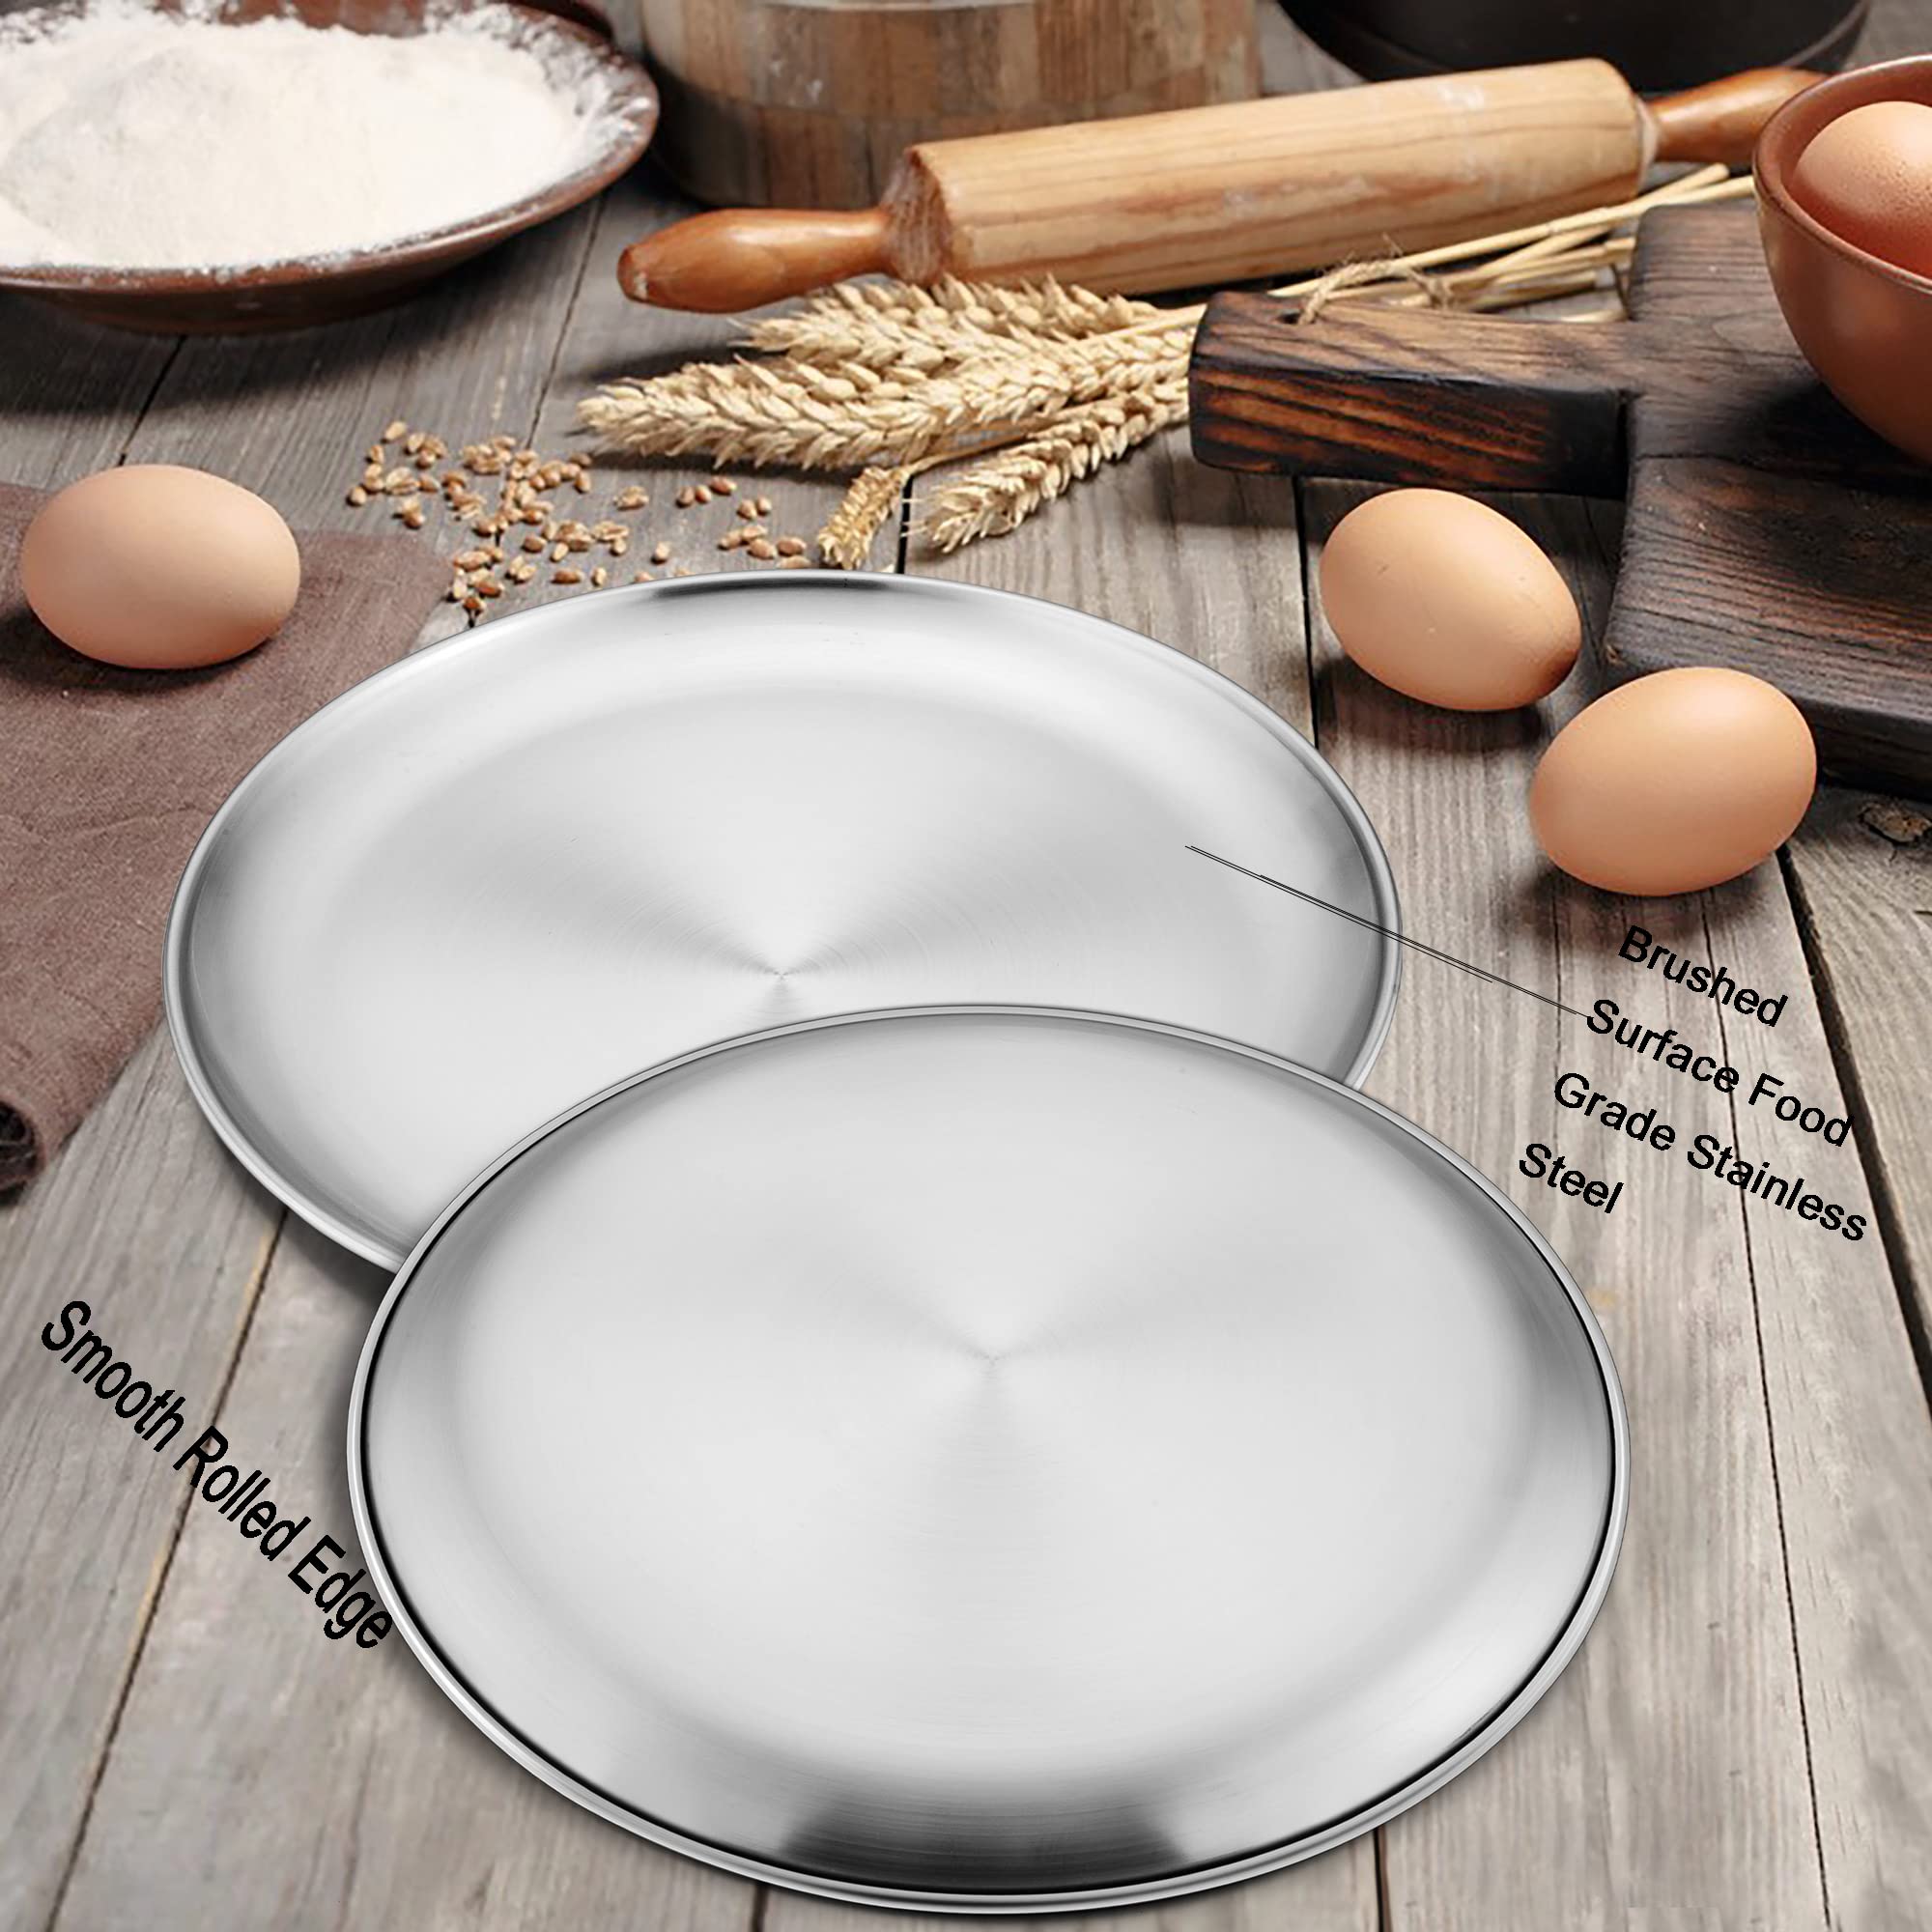 LIANYU 11.8 Inch Pizza Pan Set of 2, Stainless Steel Pizza Serving Tray for Oven Baking, Nonstick Round Pizza Pan Plate, Dishwasher Safe